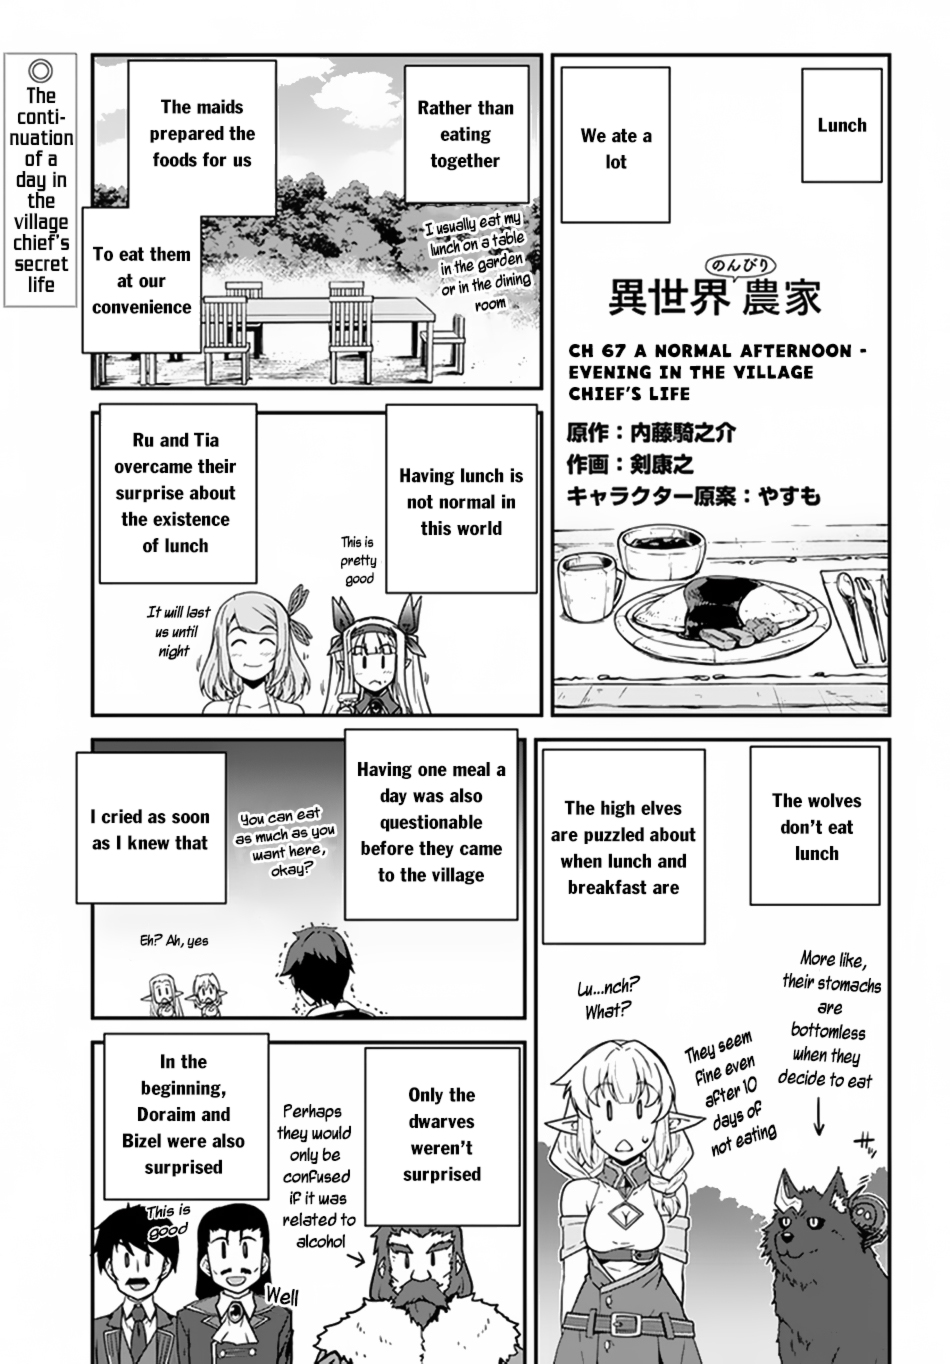 Isekai Nonbiri Nouka Chapter 67: A Normal Afternoon - Evening In The Village Chief's Life - Picture 2